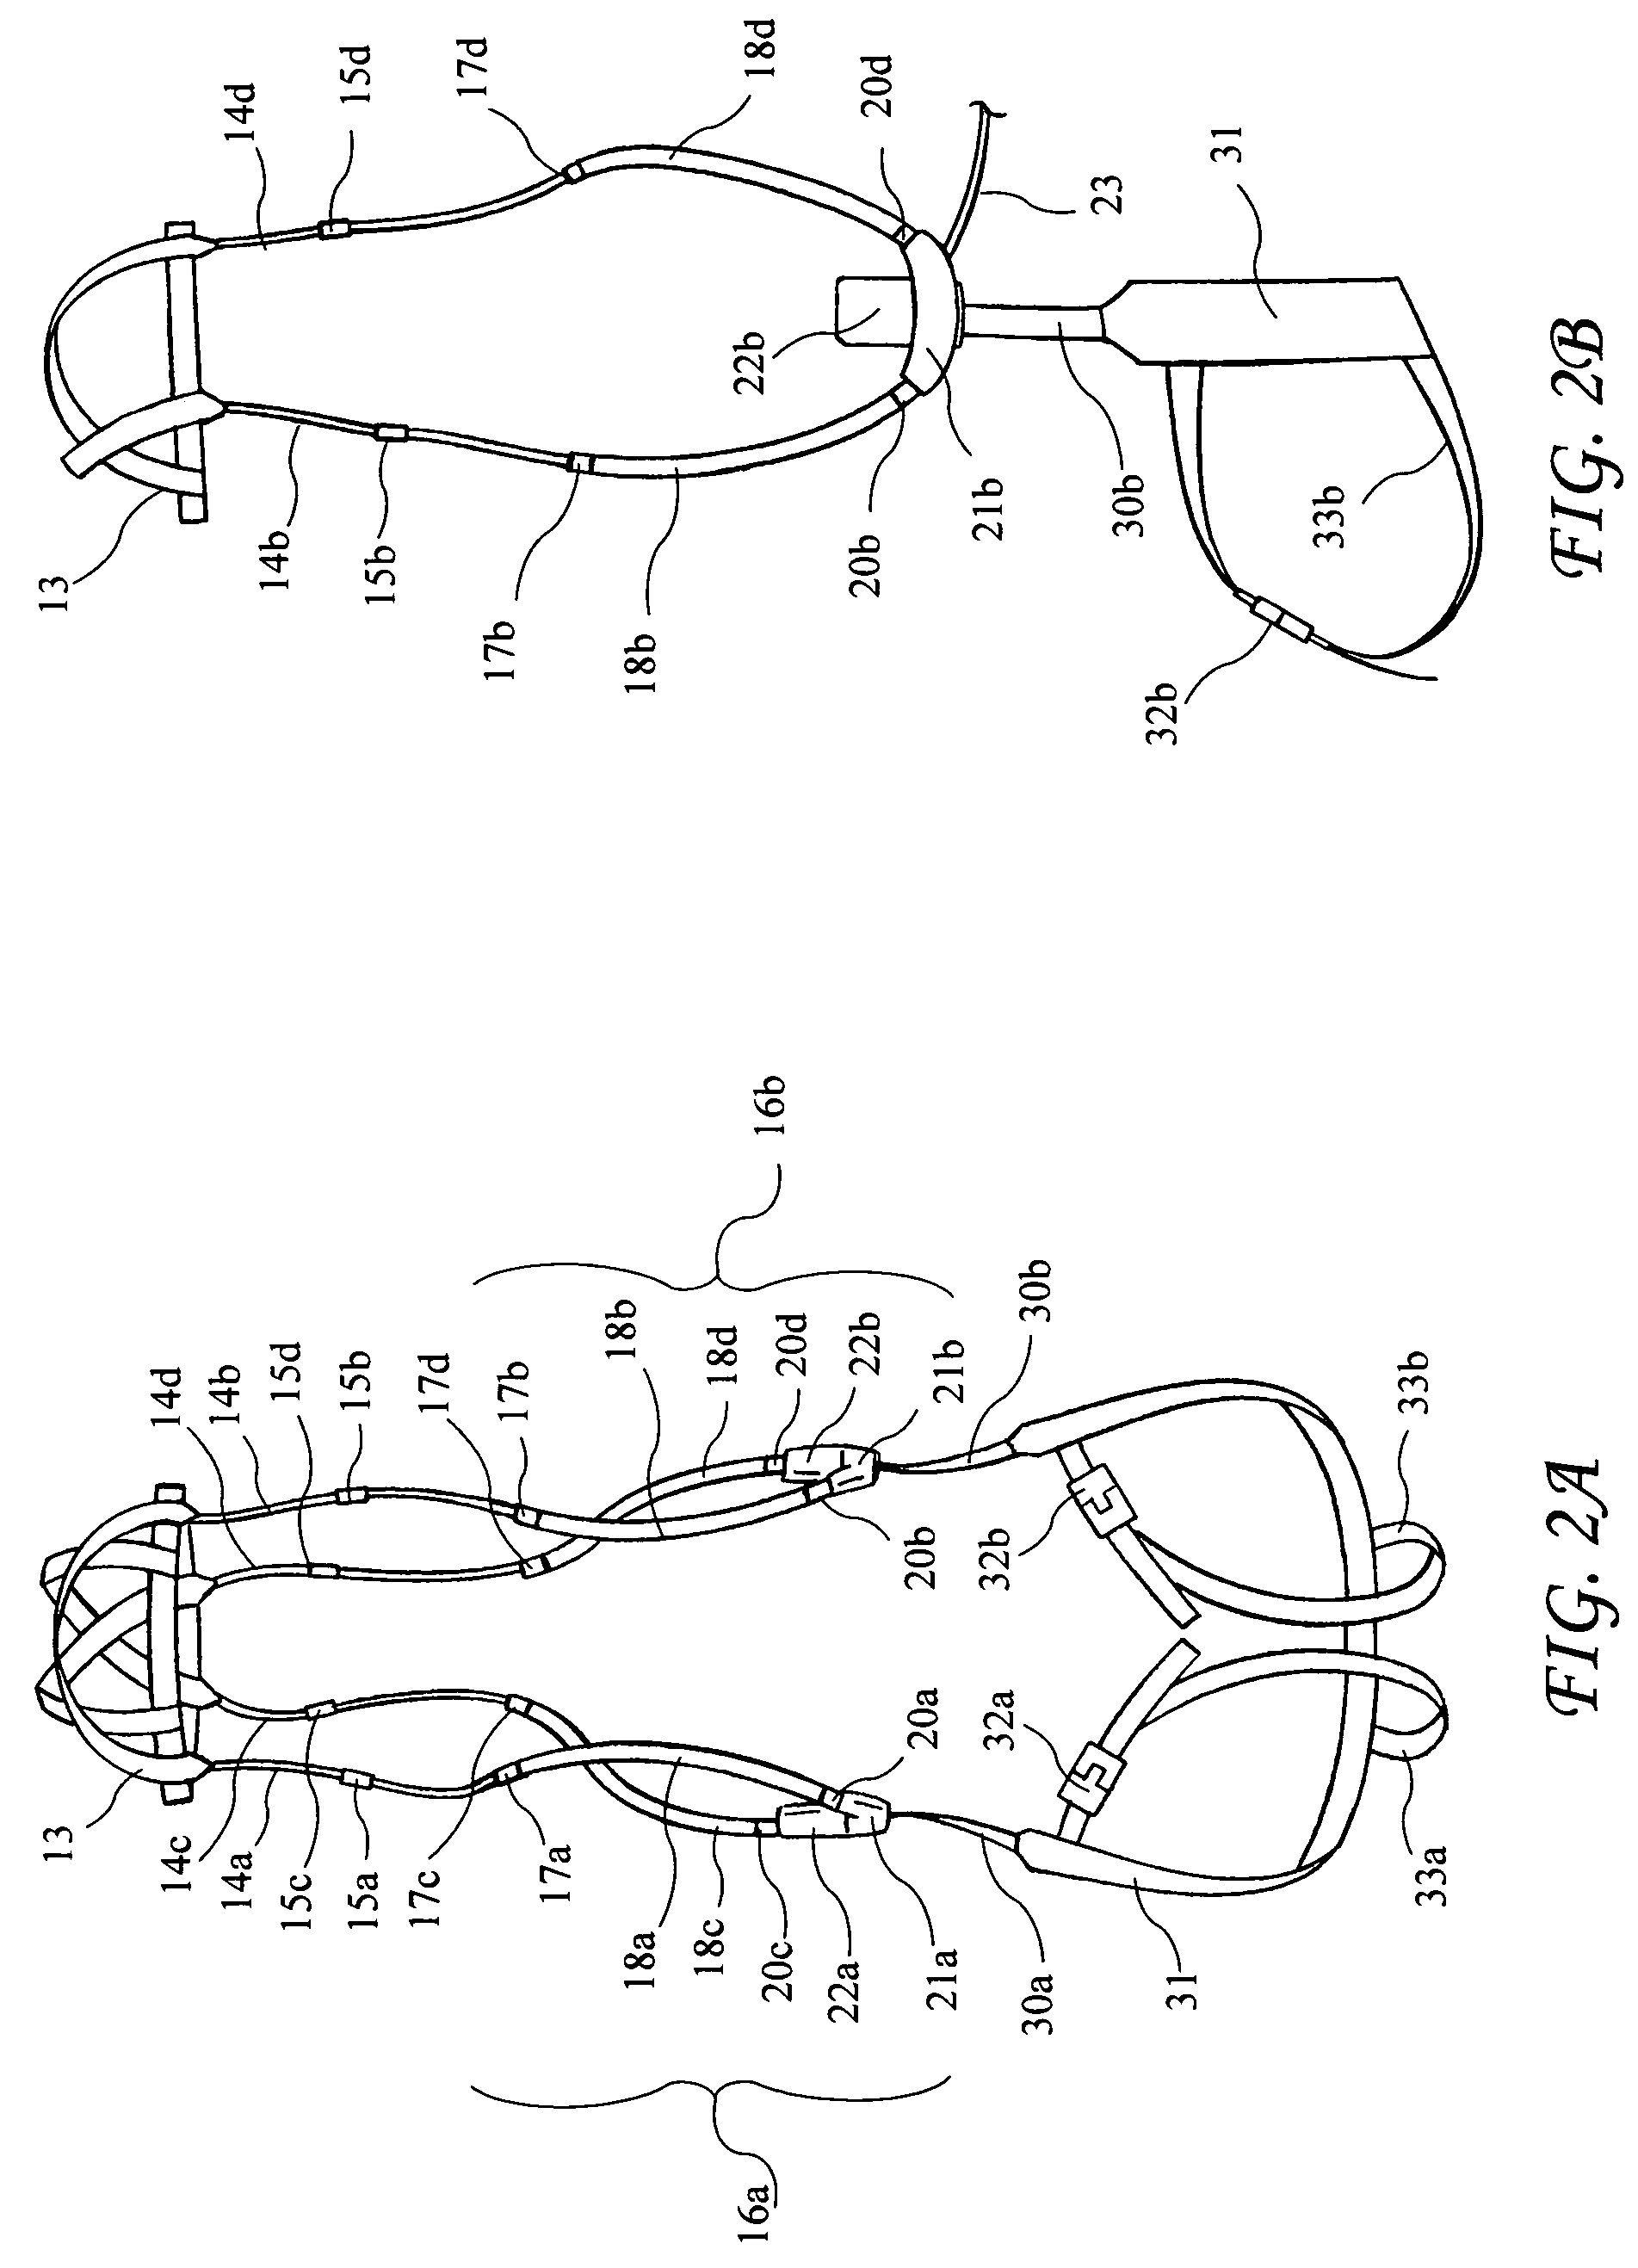 Head and neck restraint system